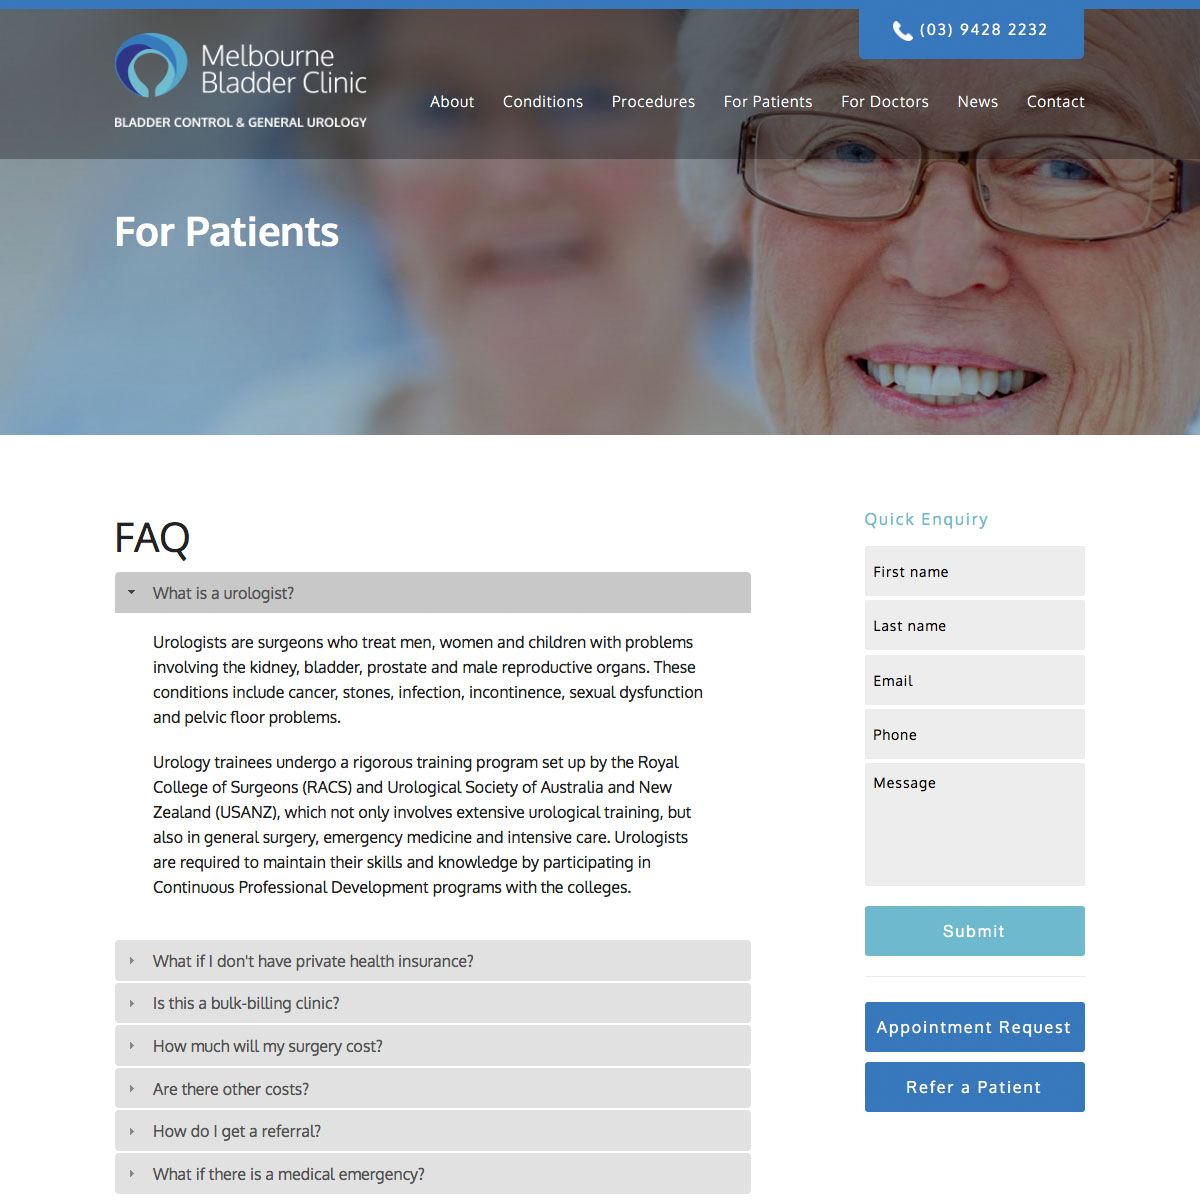 Melbourne Bladder Clinic Frequently Asked Questions